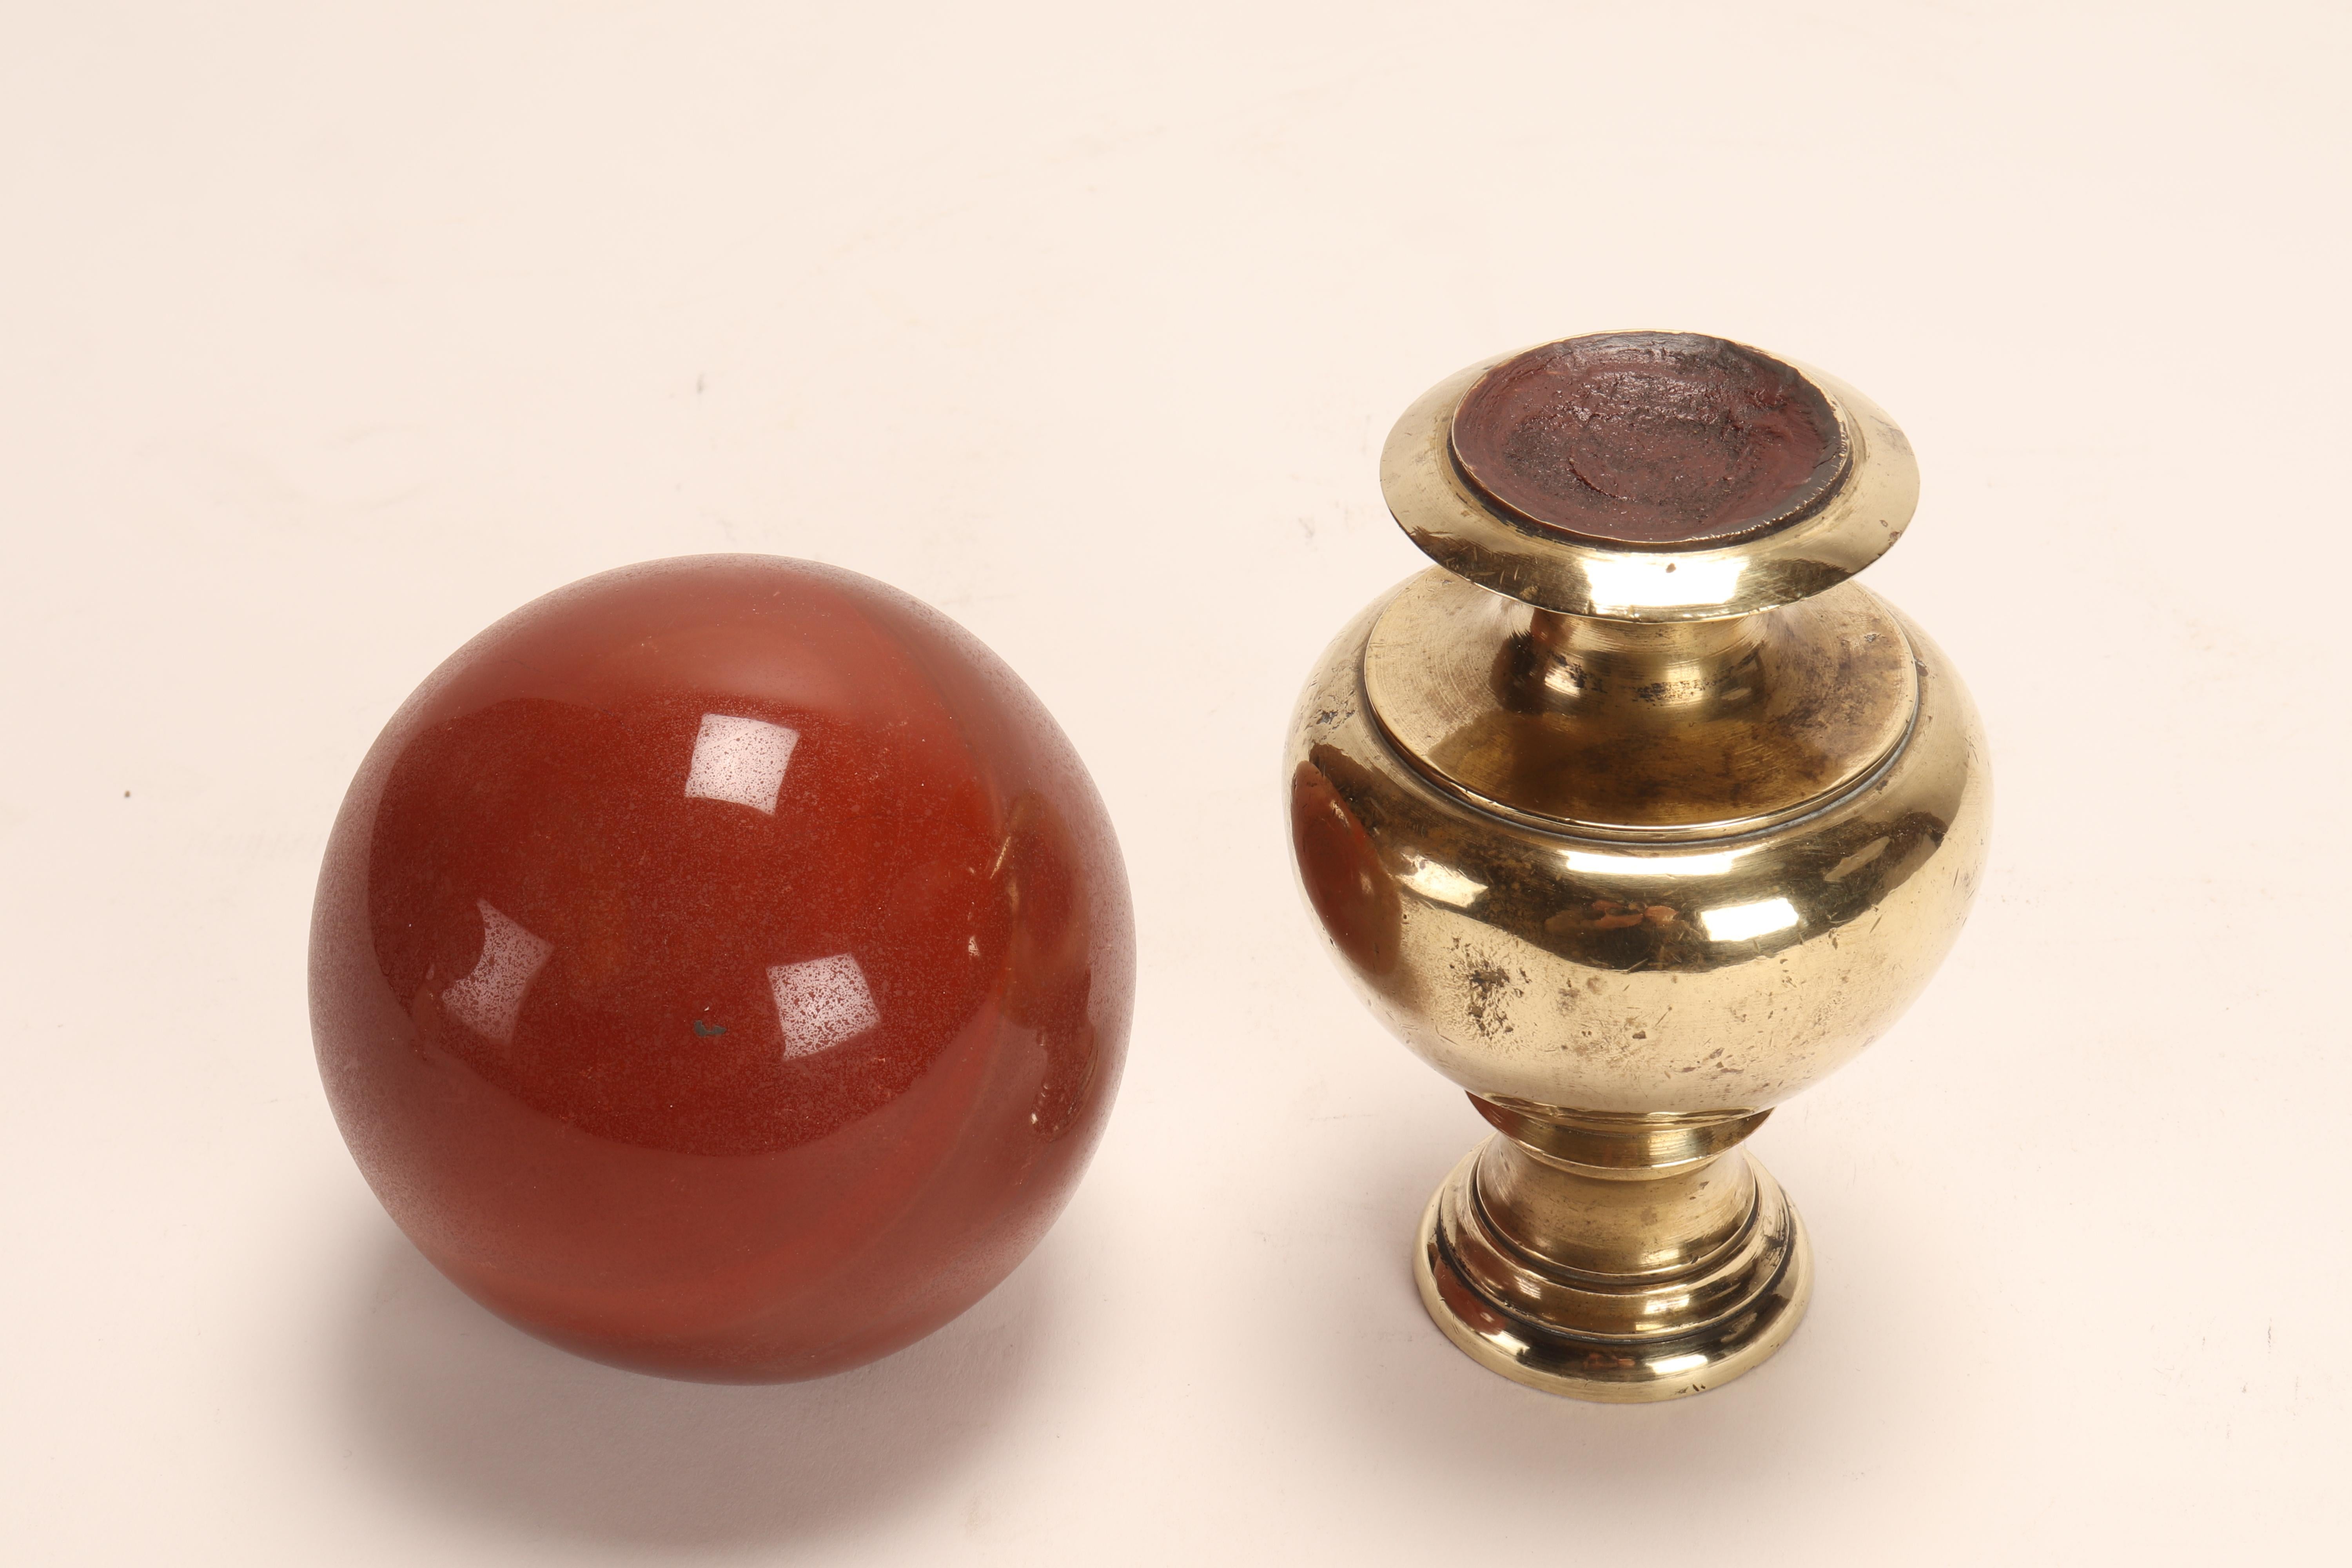 Sphere of Red Jasper, Italy, 1870 For Sale 2